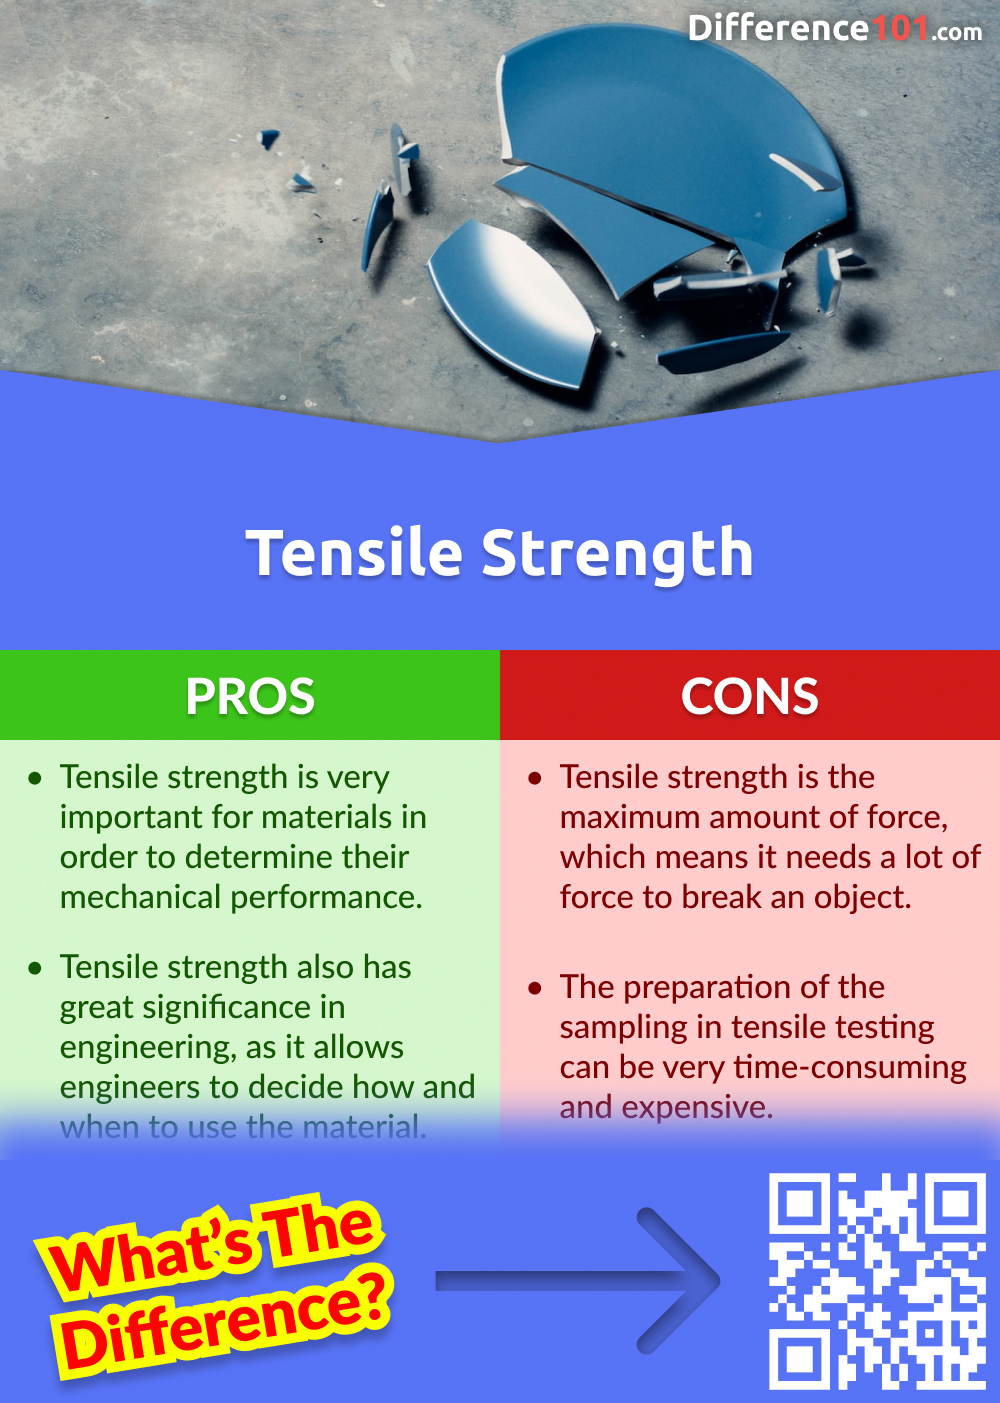 Tensile Strength Pros and Cons